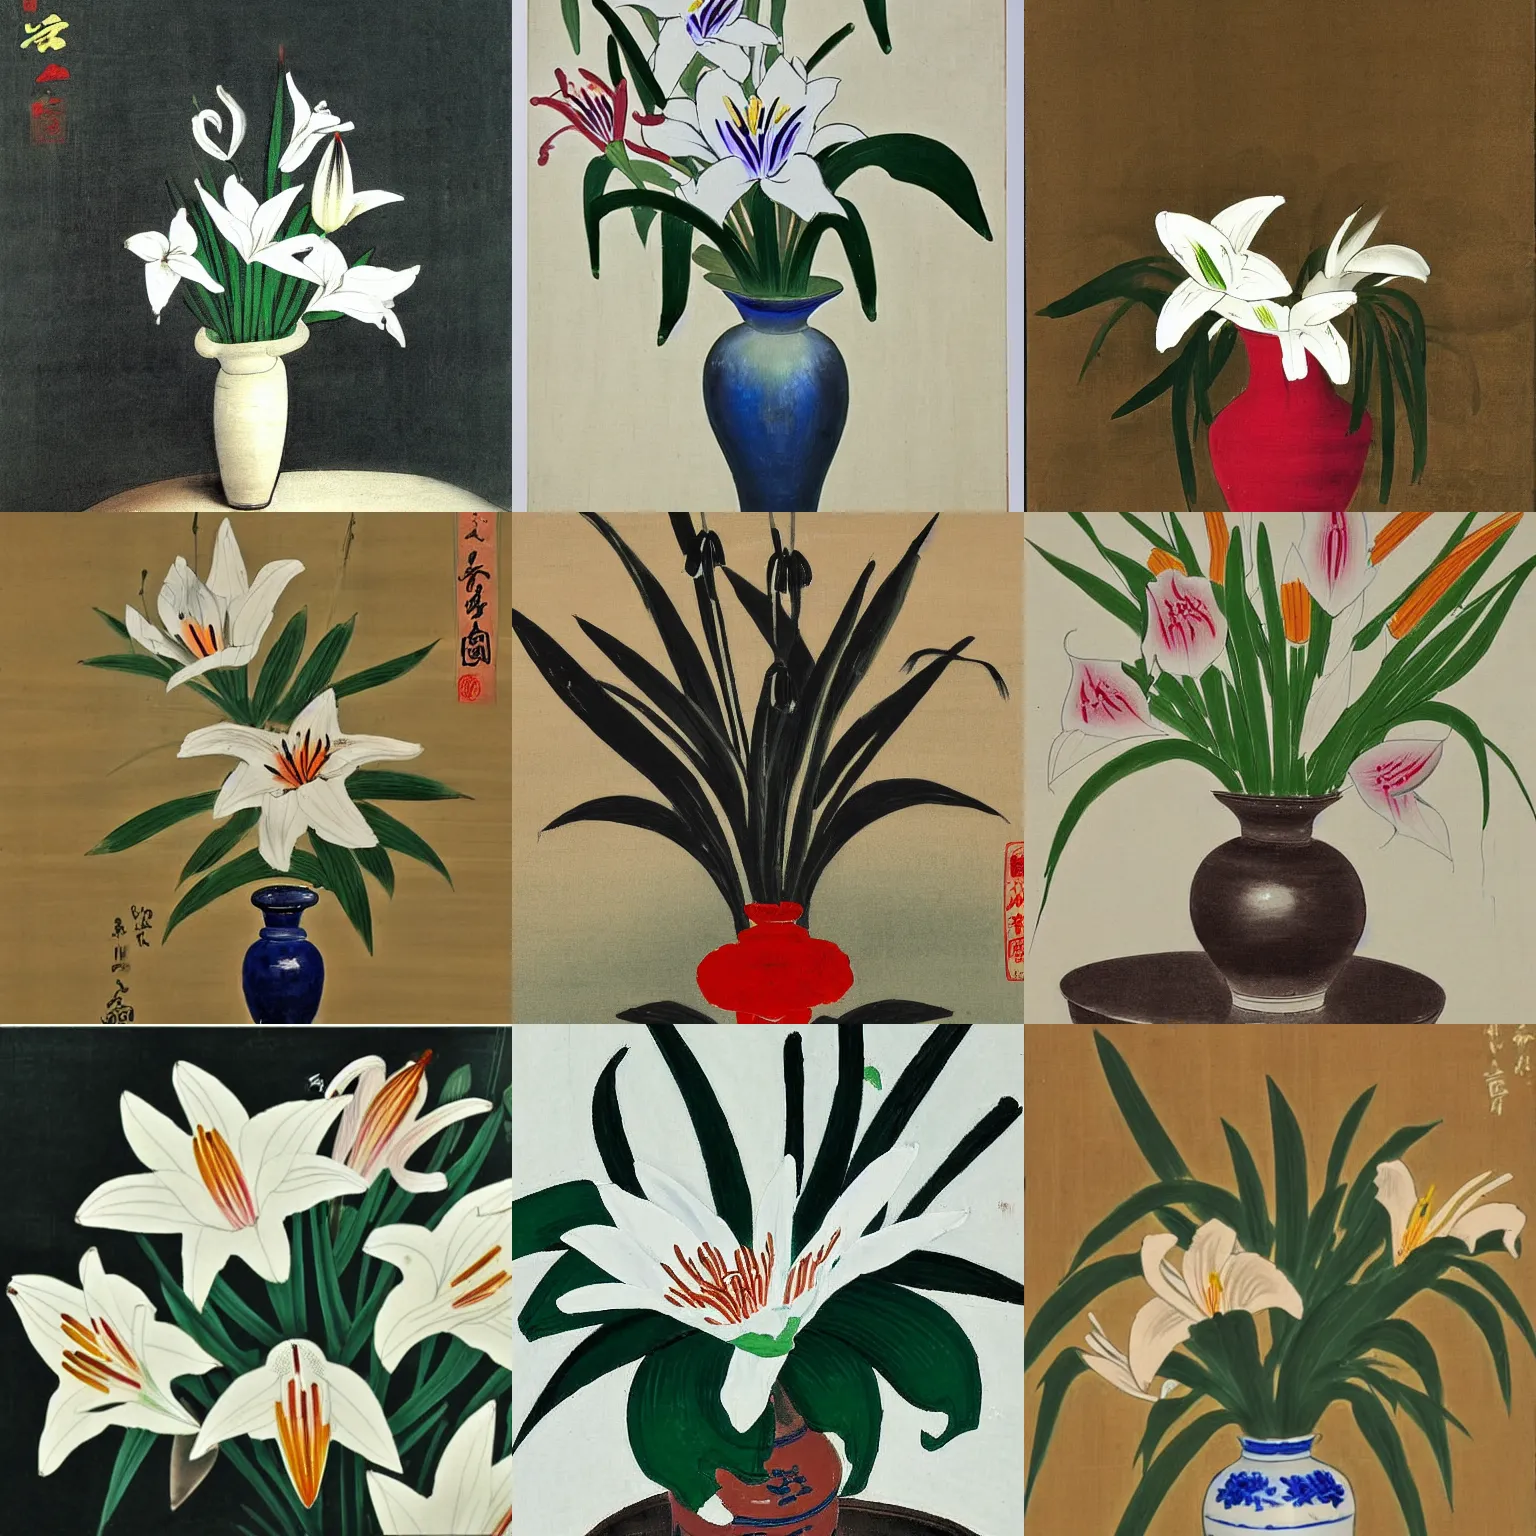 Prompt: A painting of a vase of lilies by painter Qi Baishi